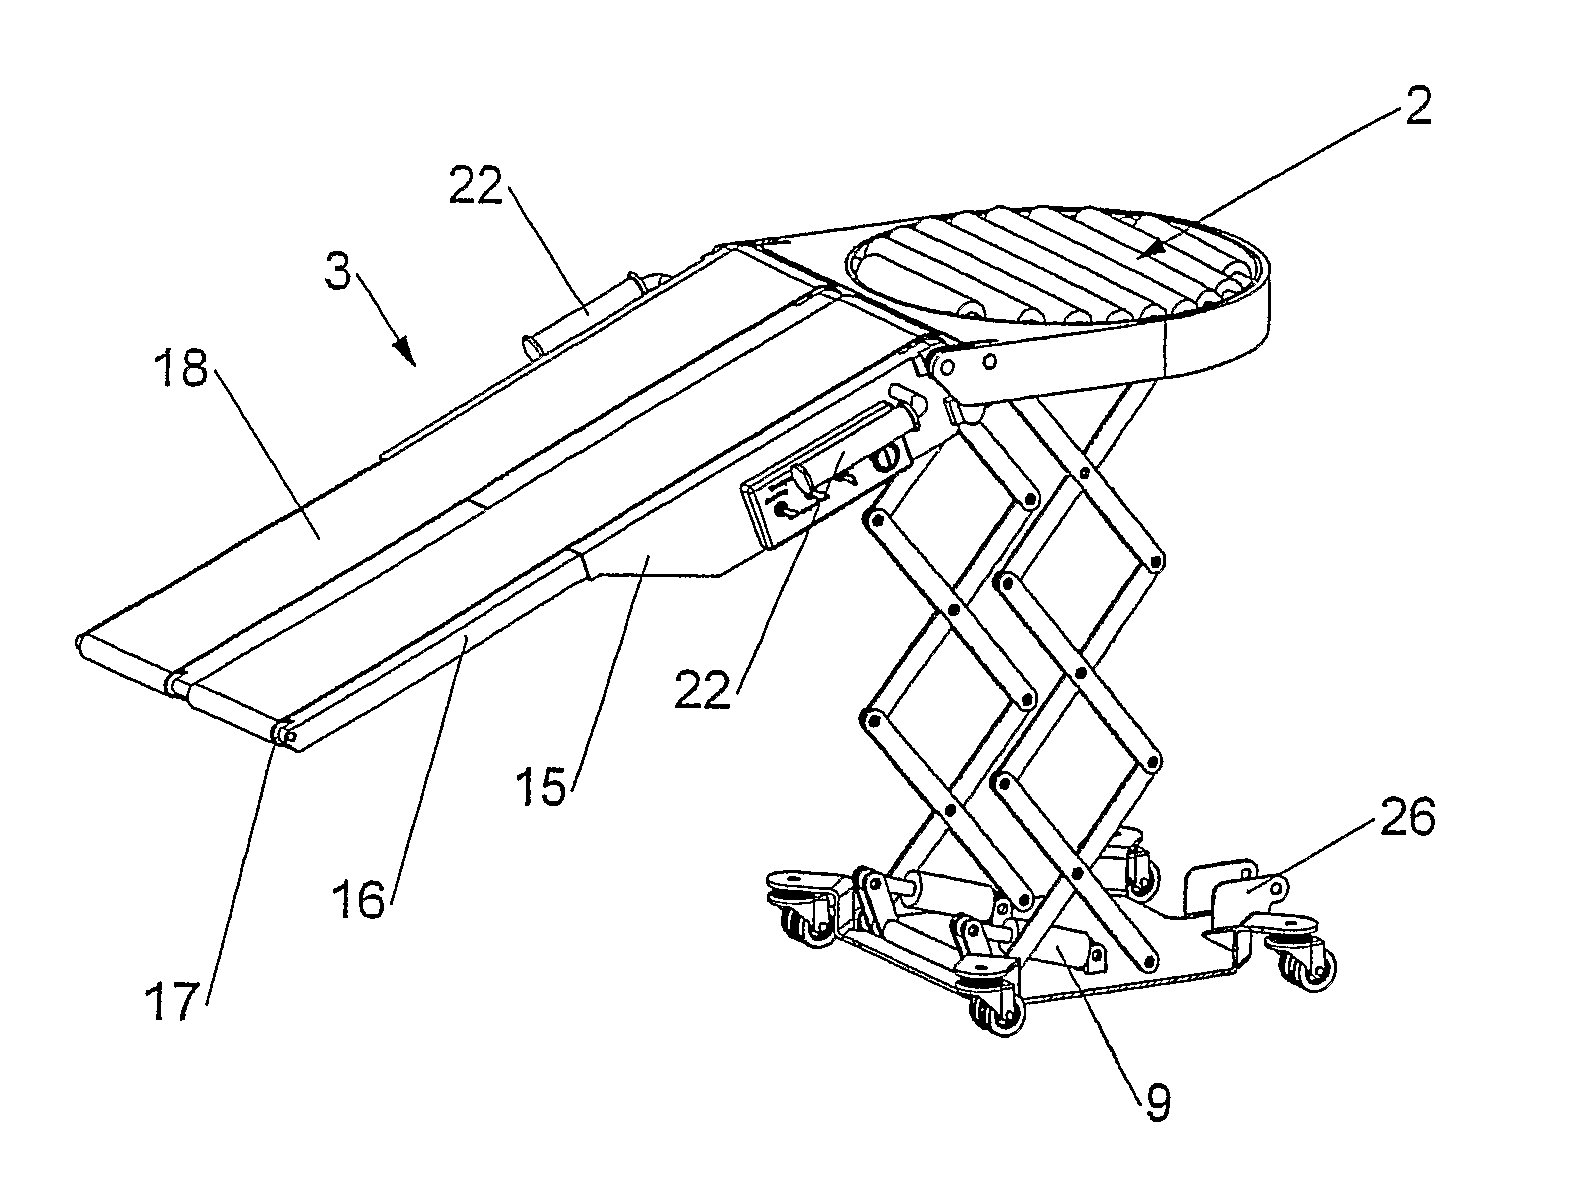 Loading and unloading apparatus